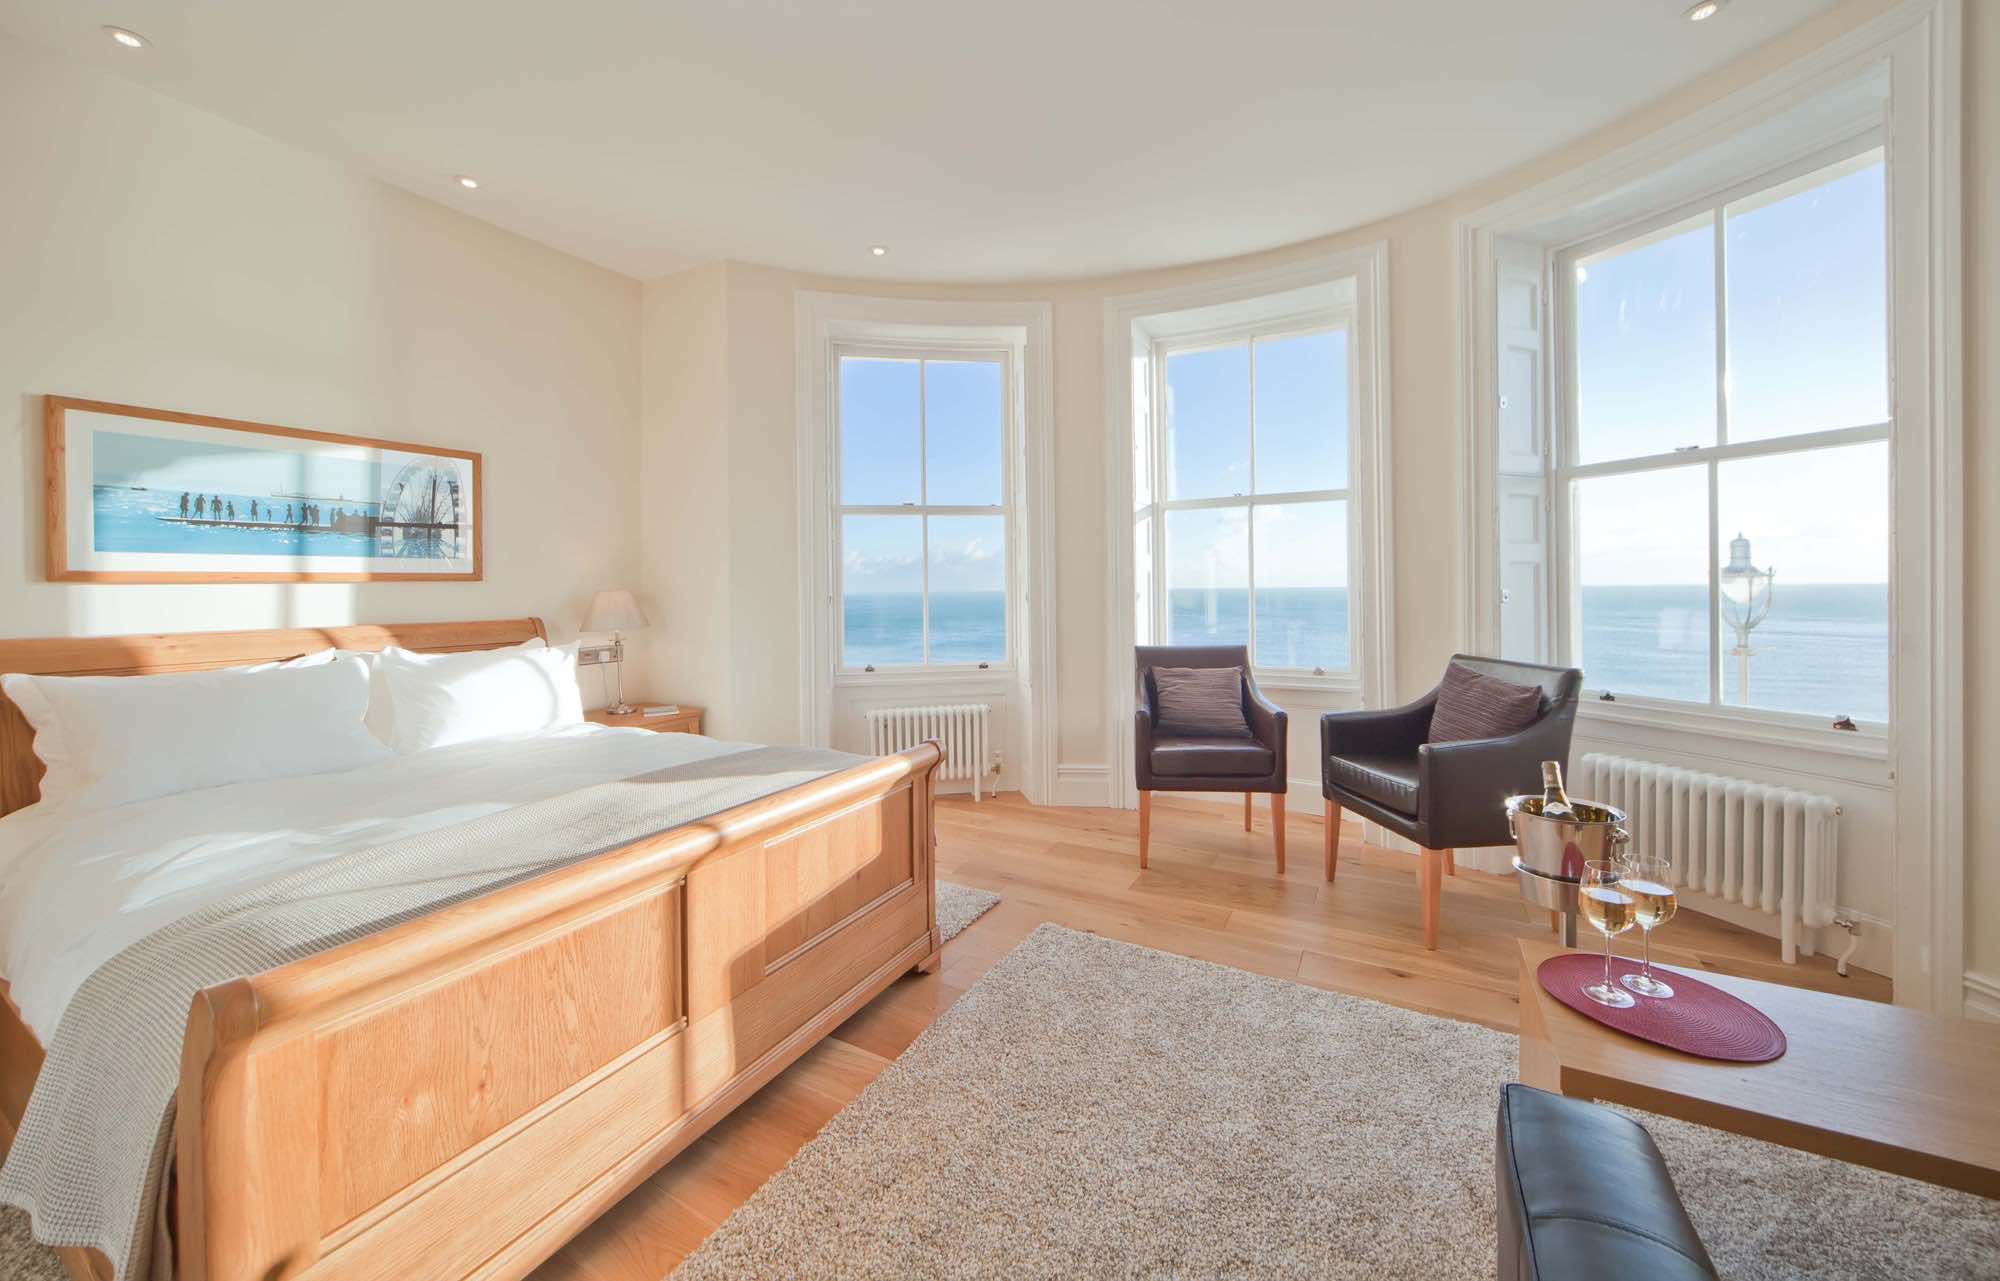 A Room With a View With seaside views is one of the best Boutique hotels in Brighton